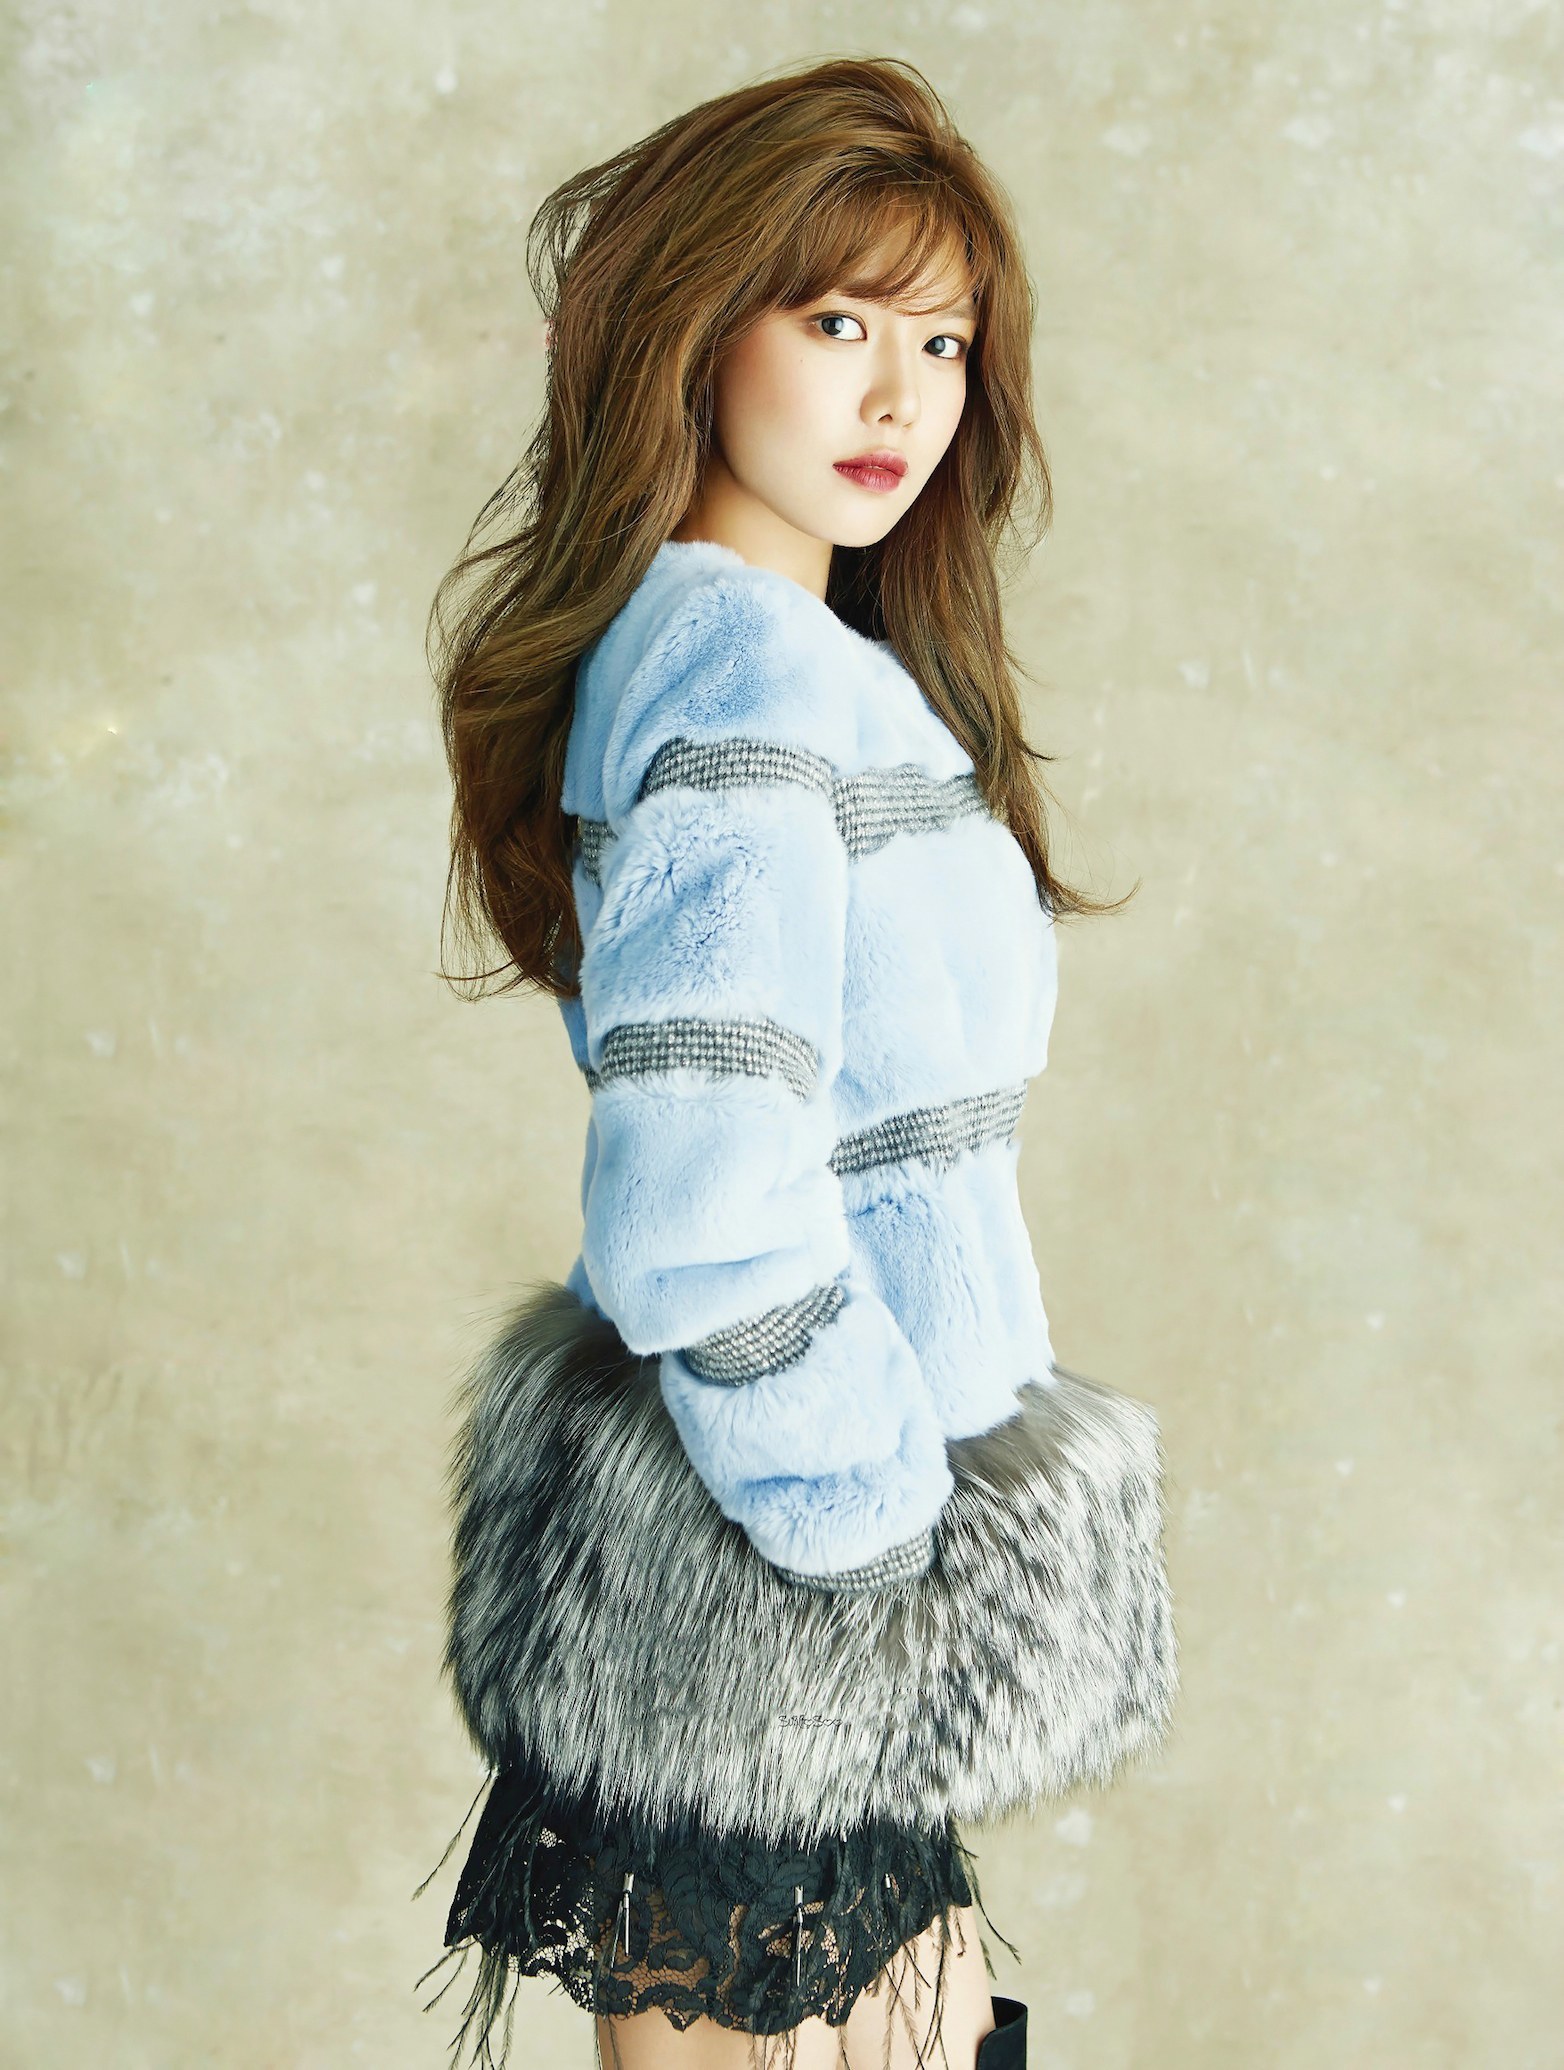 http://www.koreaboo.com/wp-content/uploads/2014/10/sooyoung-ceci.jpg